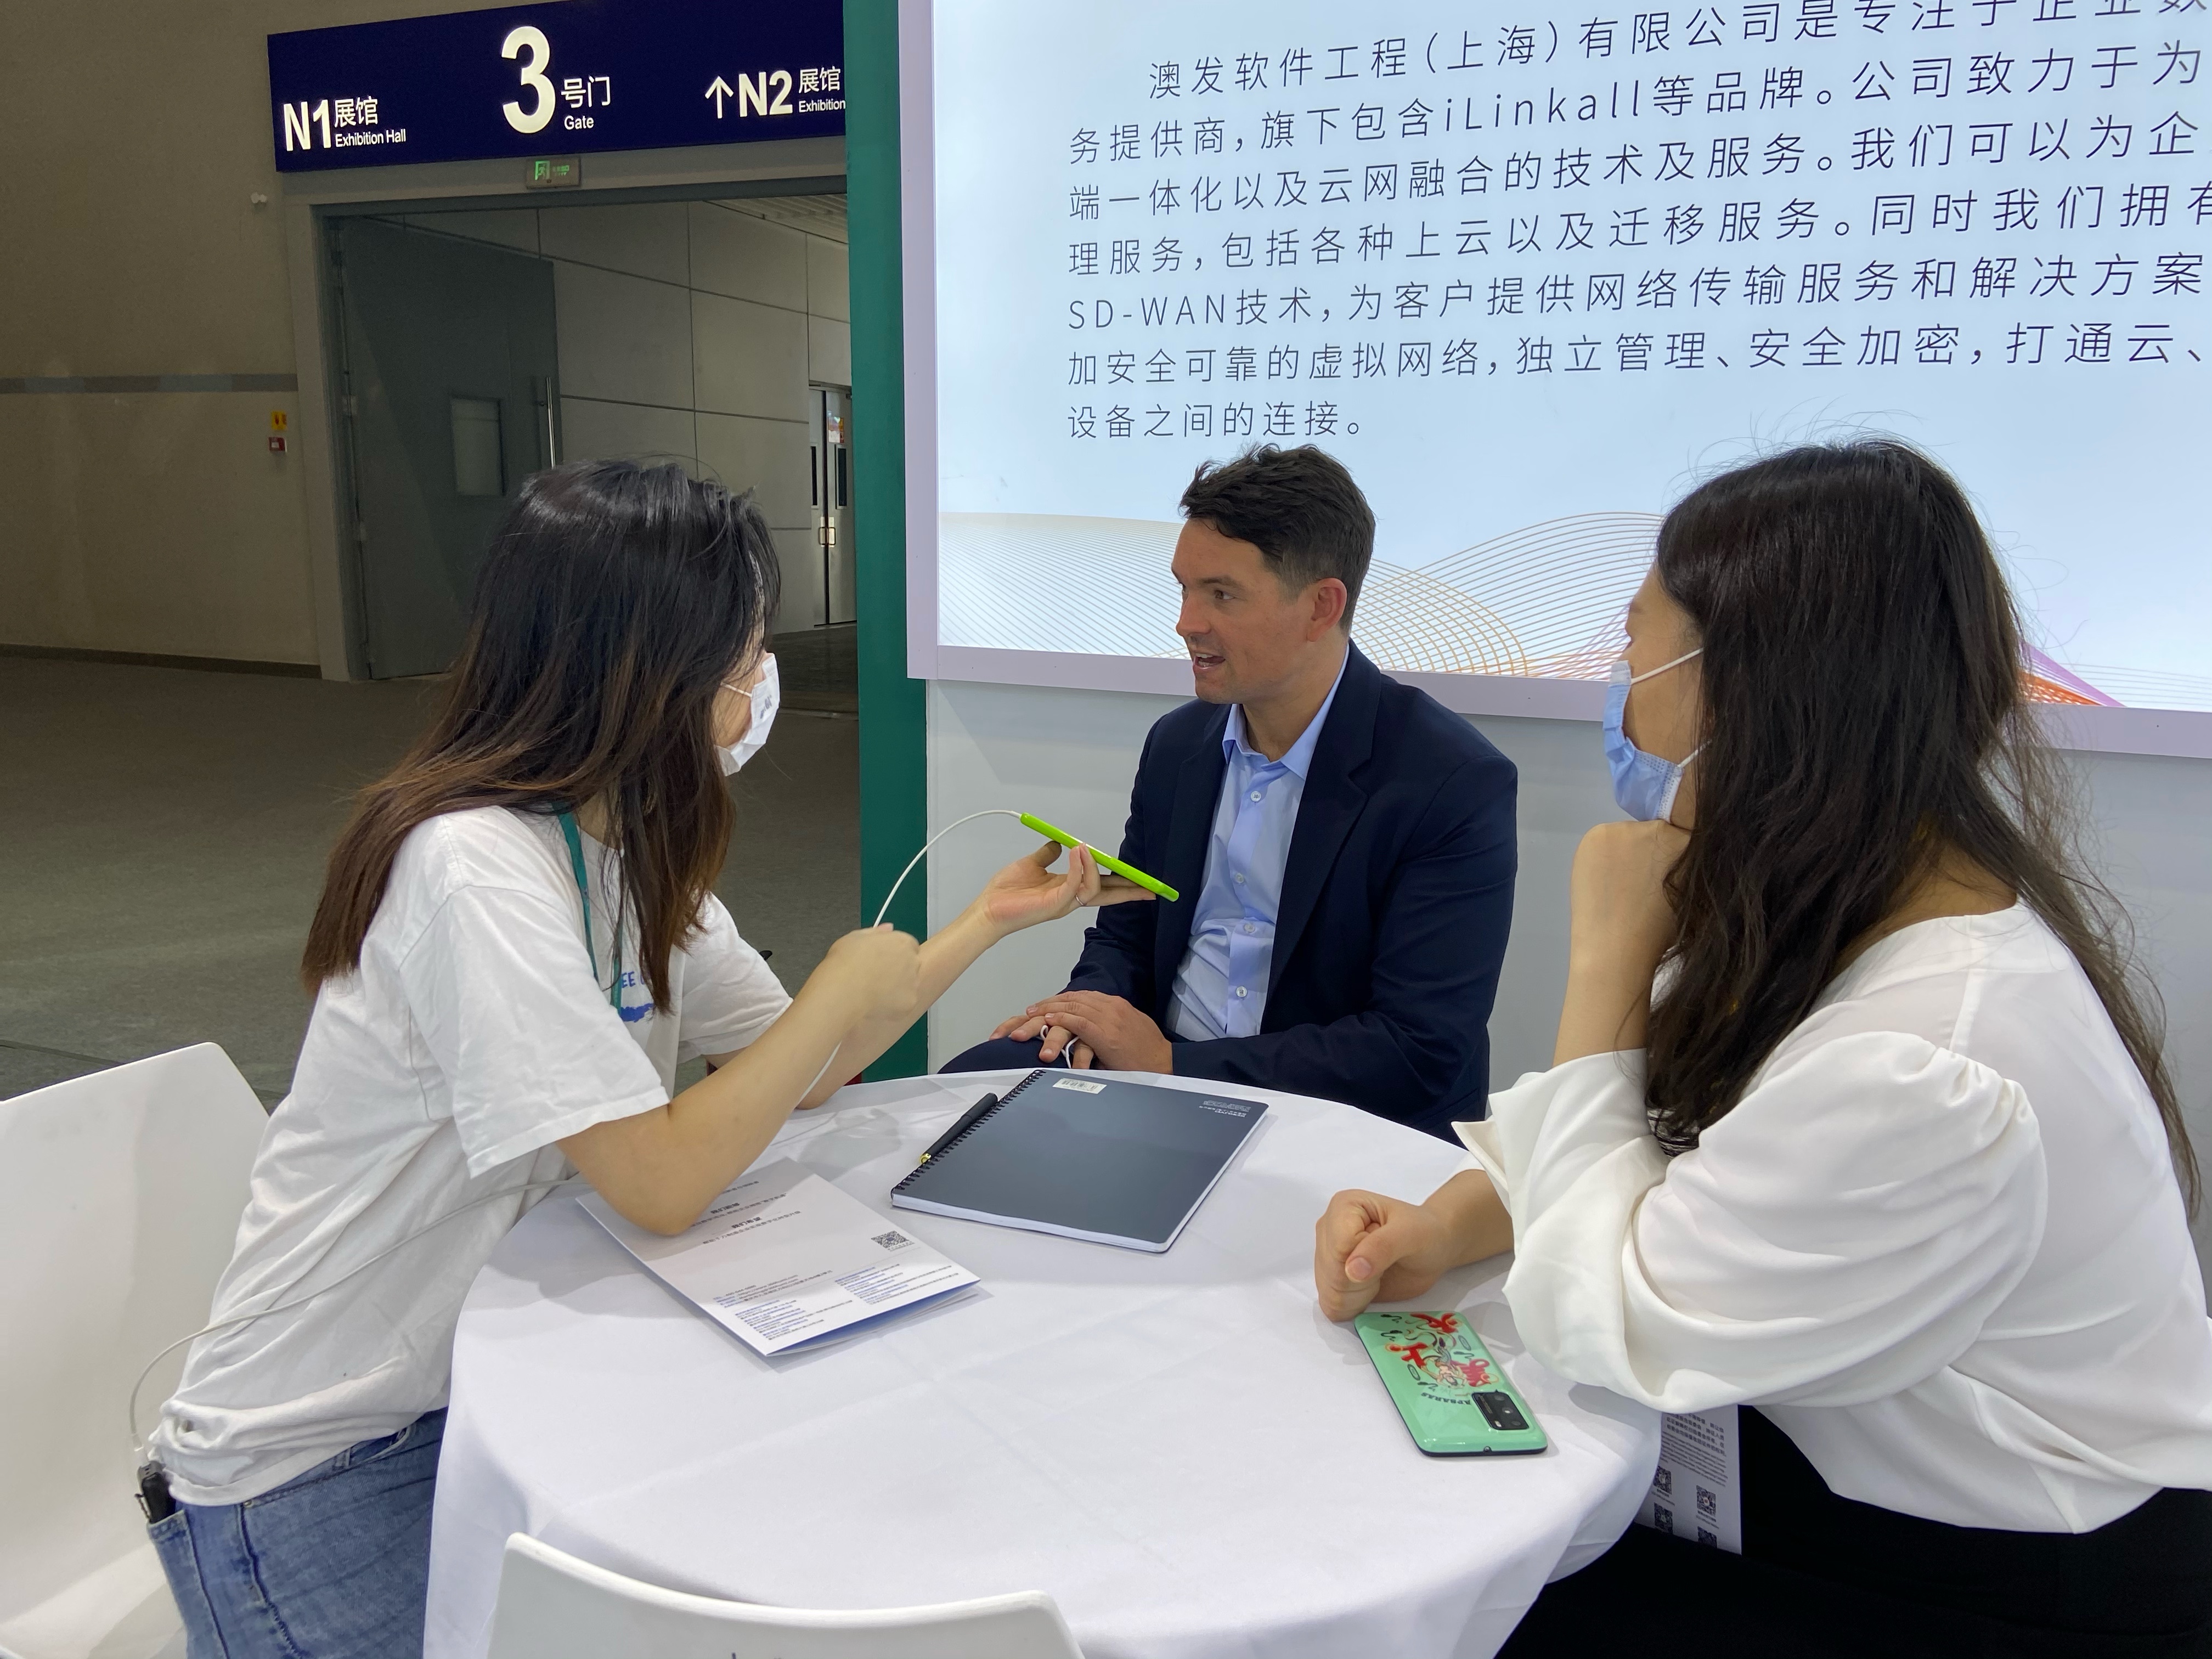 iChongqing interviewing Mr.Miller, the Trade and Investment Commissioner and Deputy Consul-General (Commercial) at the Australian Consulate-General in Chengdu(iChongqing\Du Min)